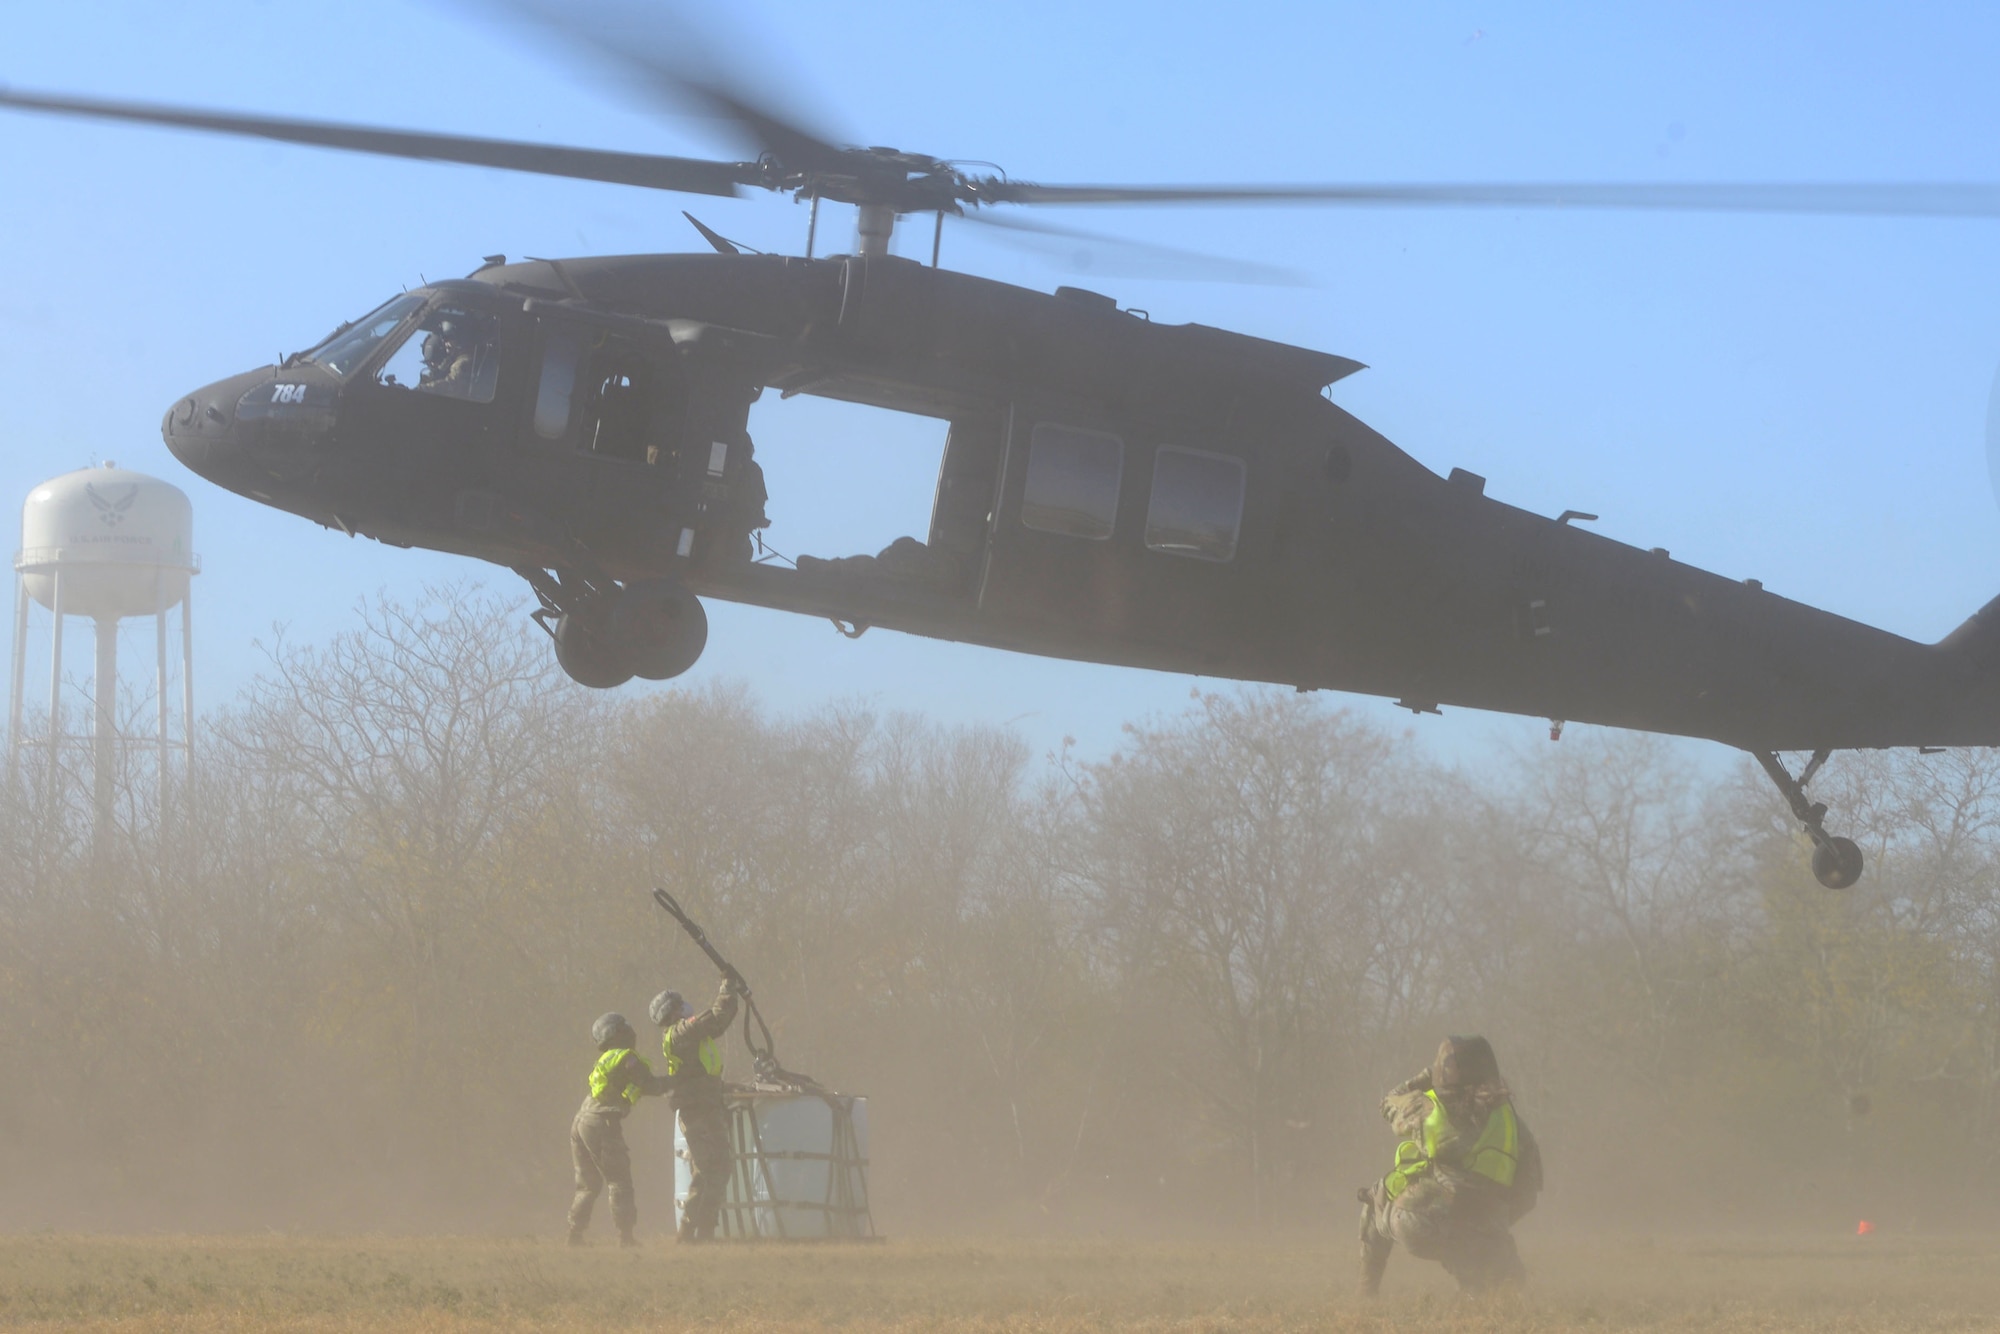 Operation Nightstorm team members work together to attach a sling load to a UH-60 Black Hawk helicopter Dec. 15, 2020, at Joint Base San Antonio-Chapman Training Annex, Texas. (U.S. Air Force photo by Tech. Sgt. Samantha Mathison)